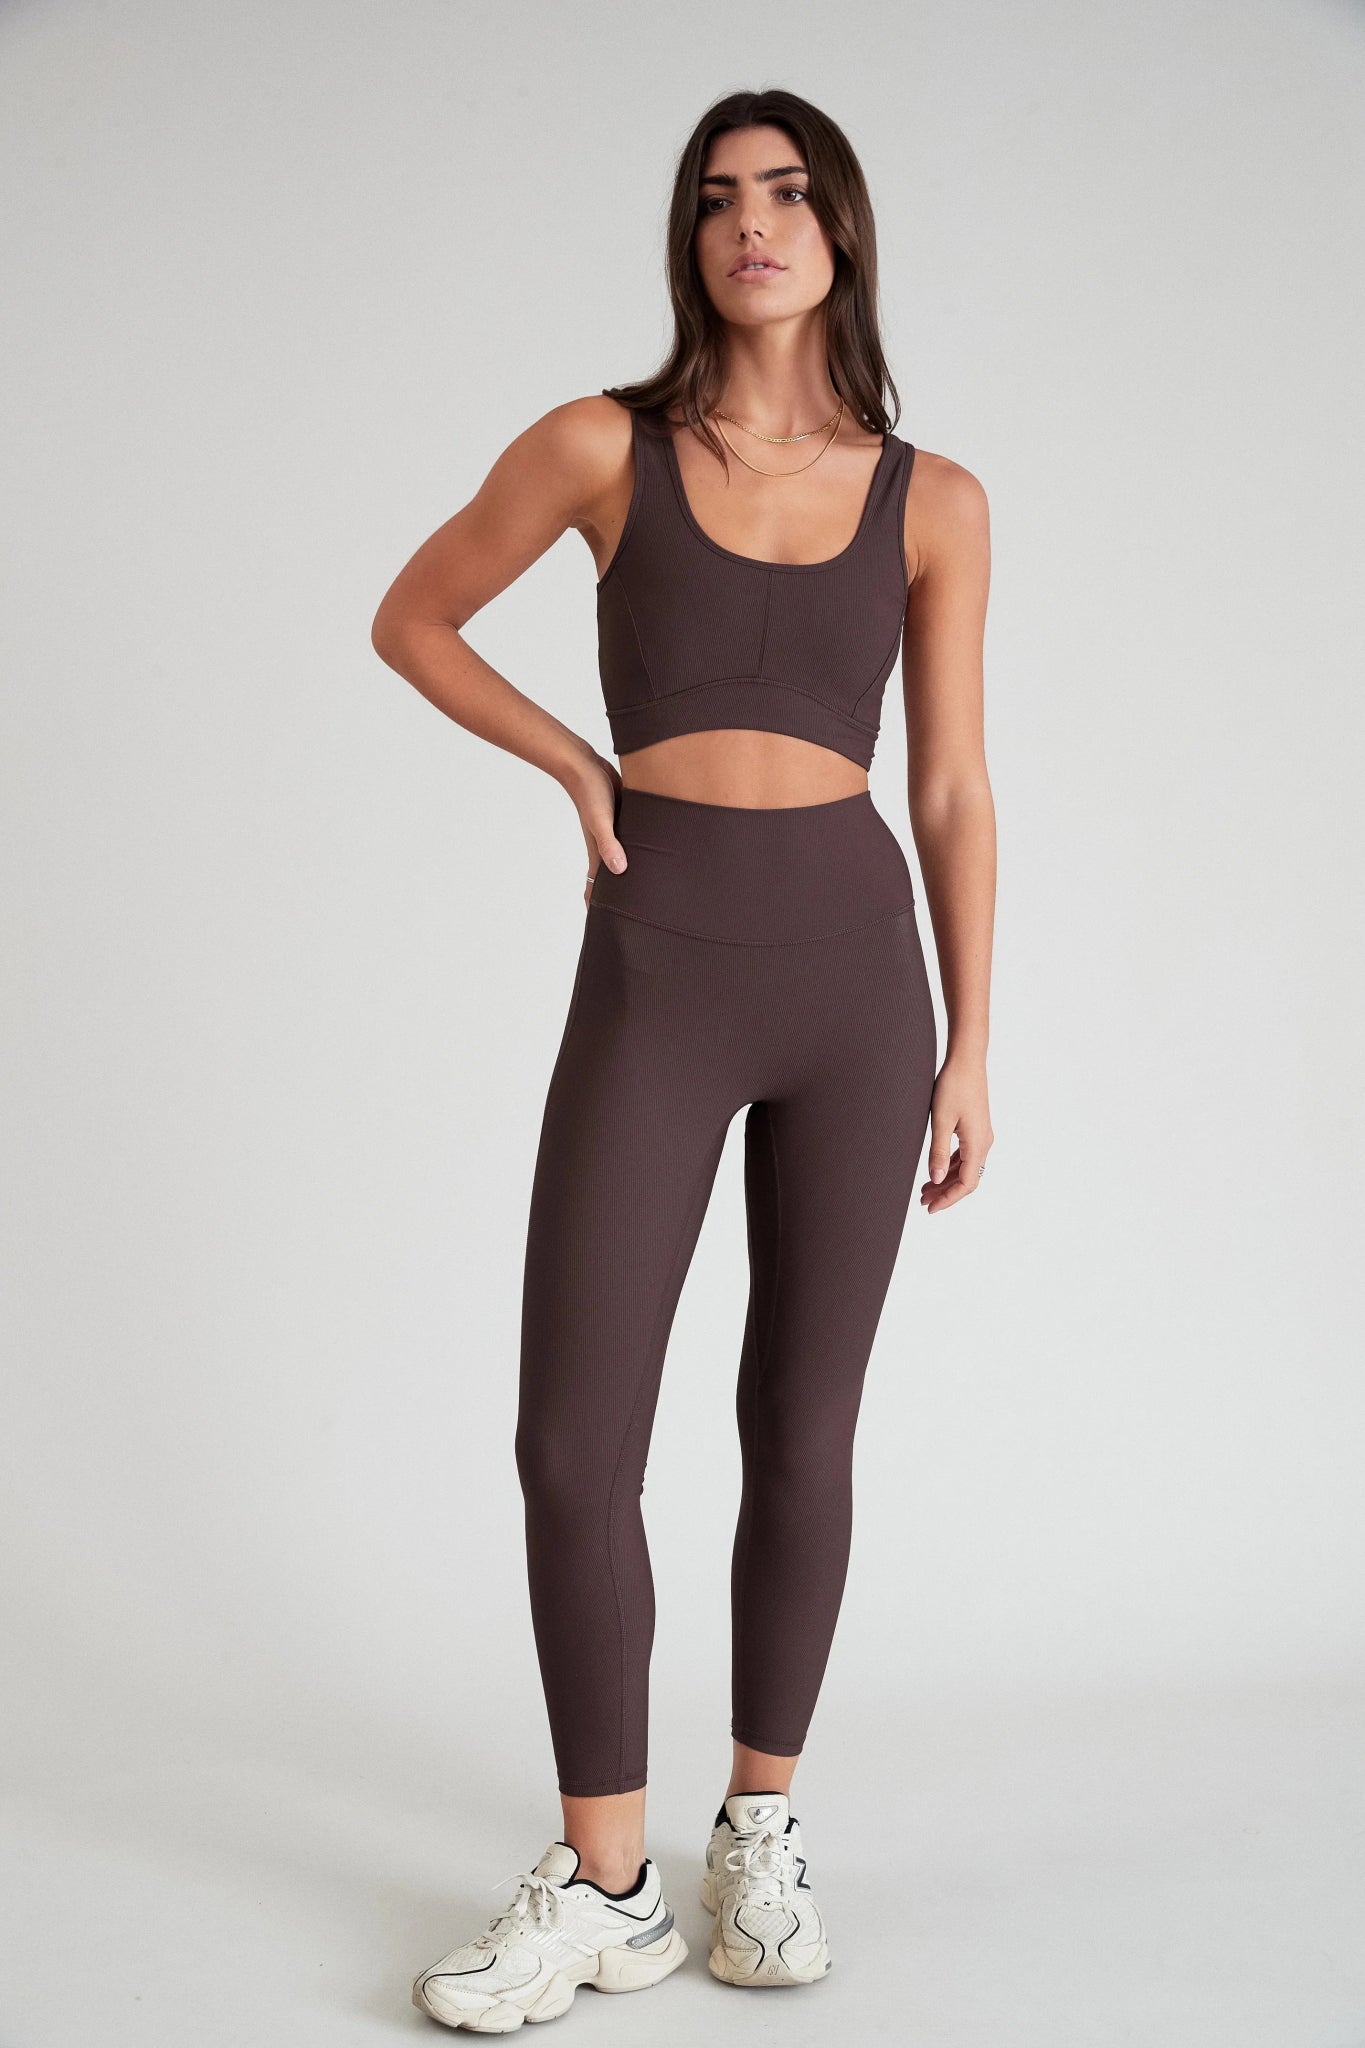 Active Wear Brands To Watch Out: All Fenix, Filippa K, Wone - Furthermore